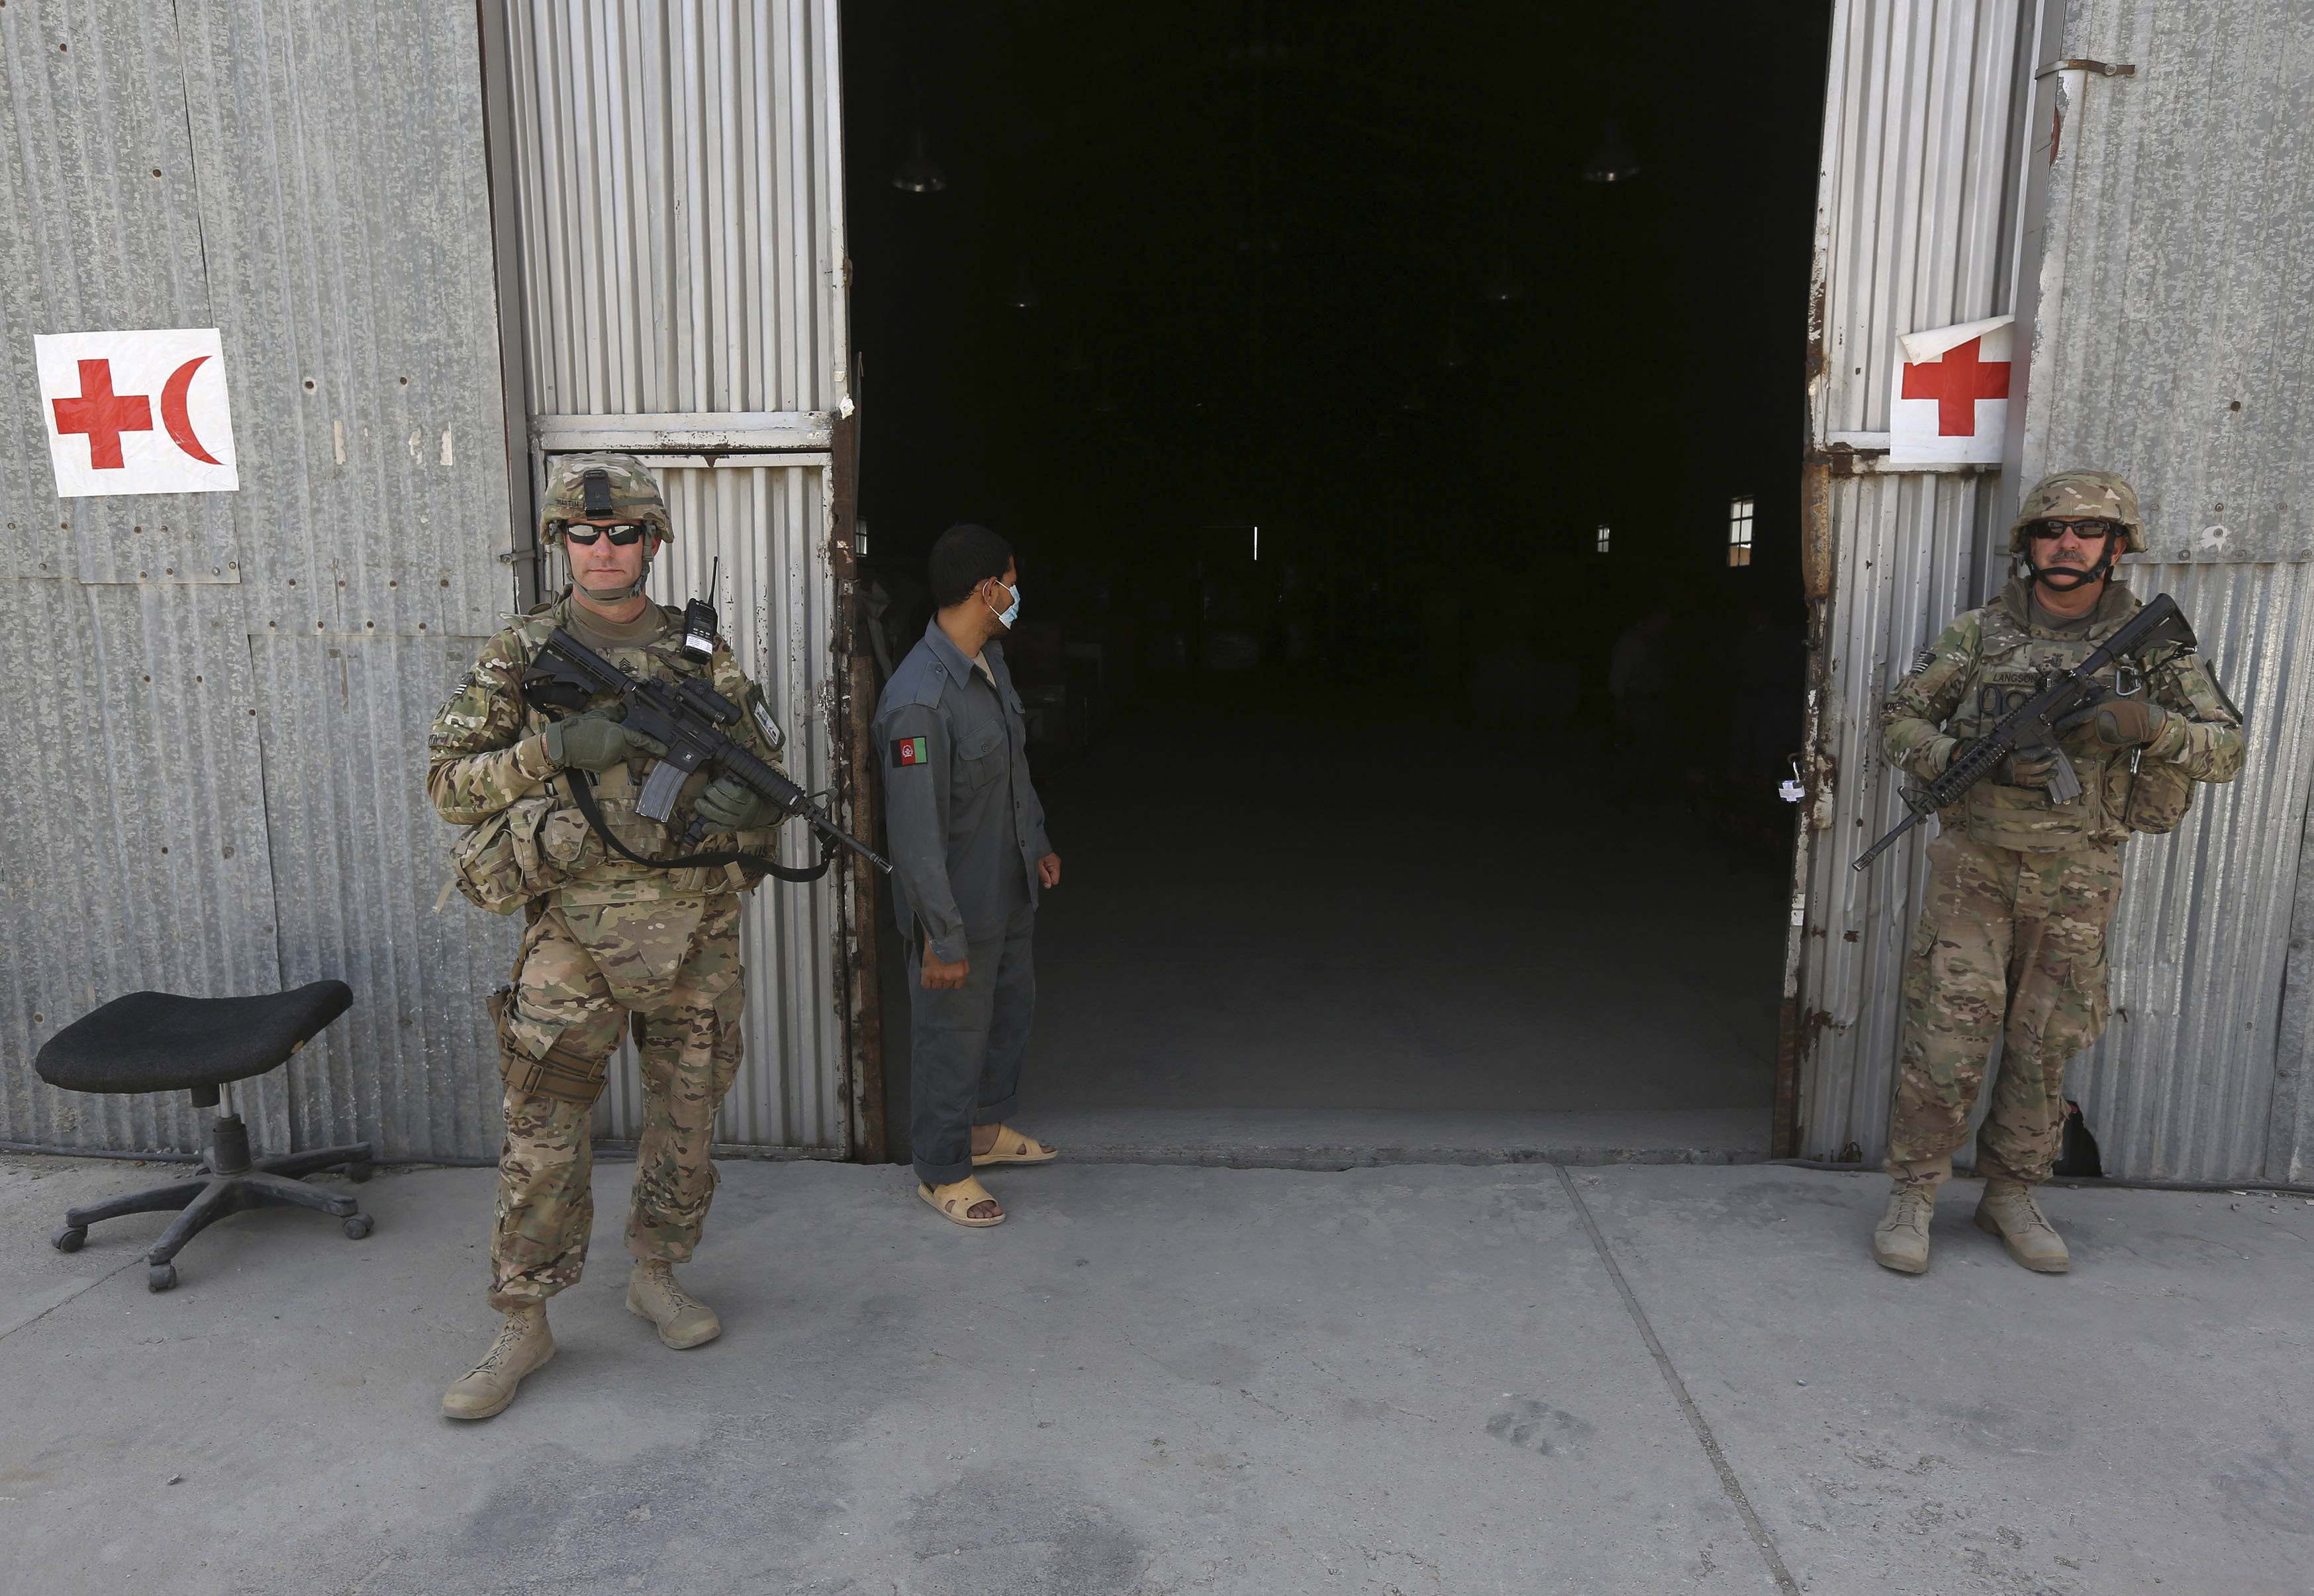 Reuters: U.S. to Leave More Troops in Afghanistan than First Planned